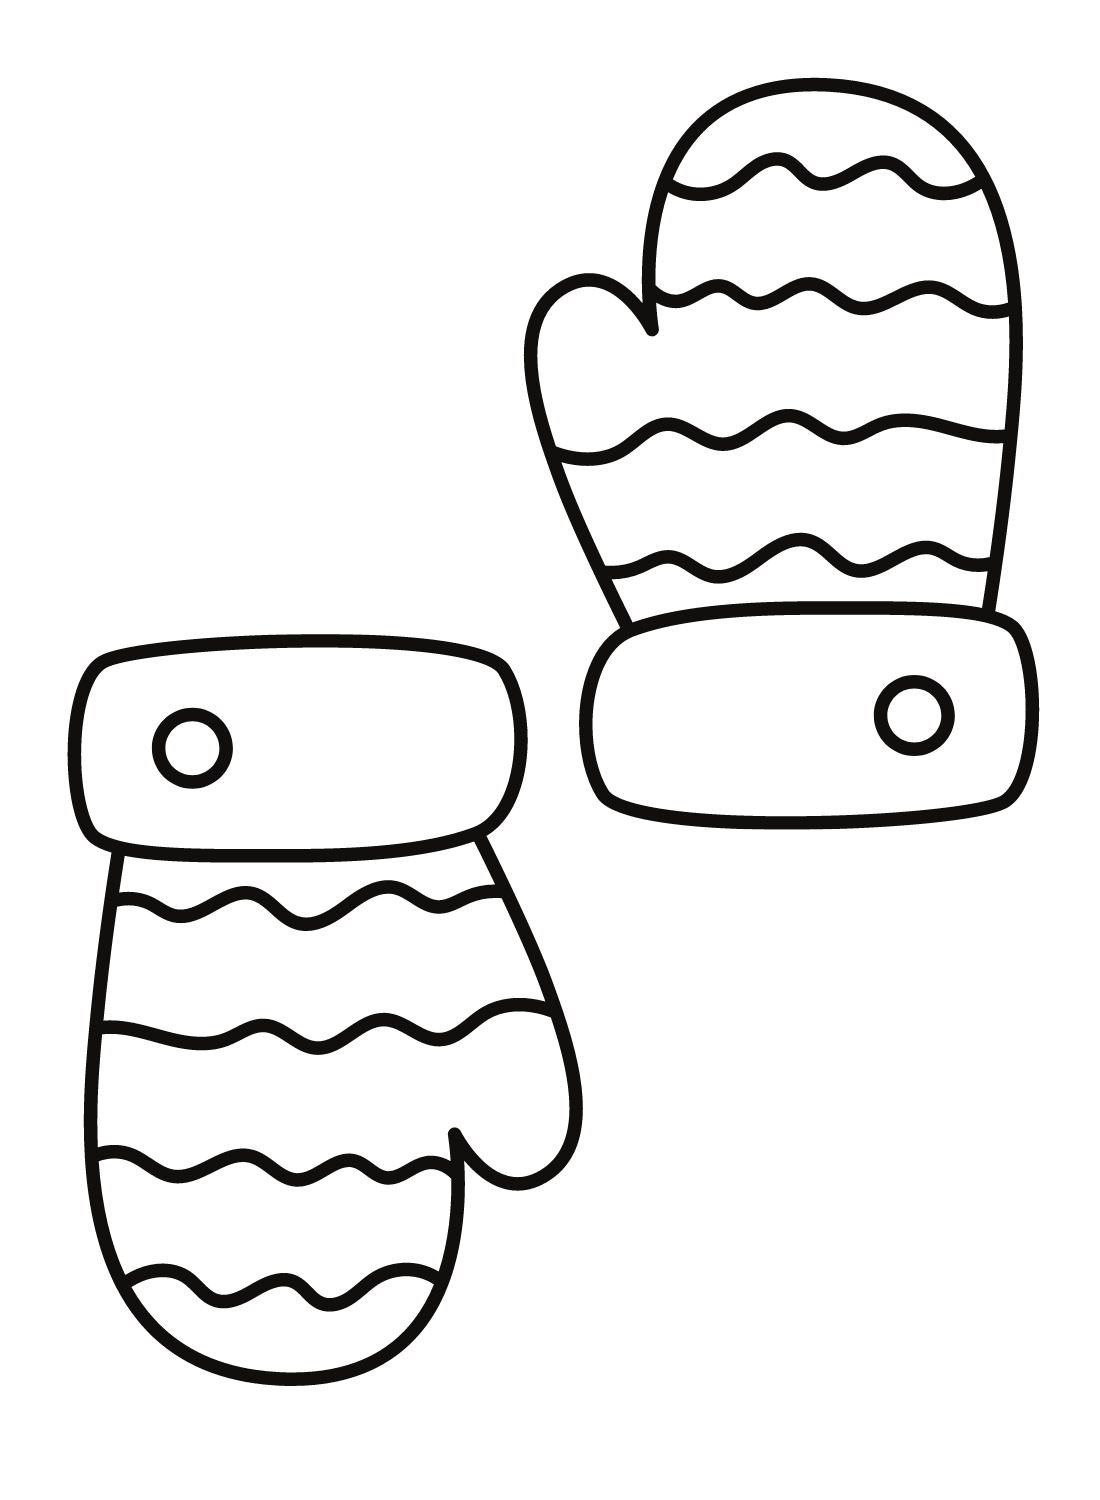 Mittens Printable Coloring Page